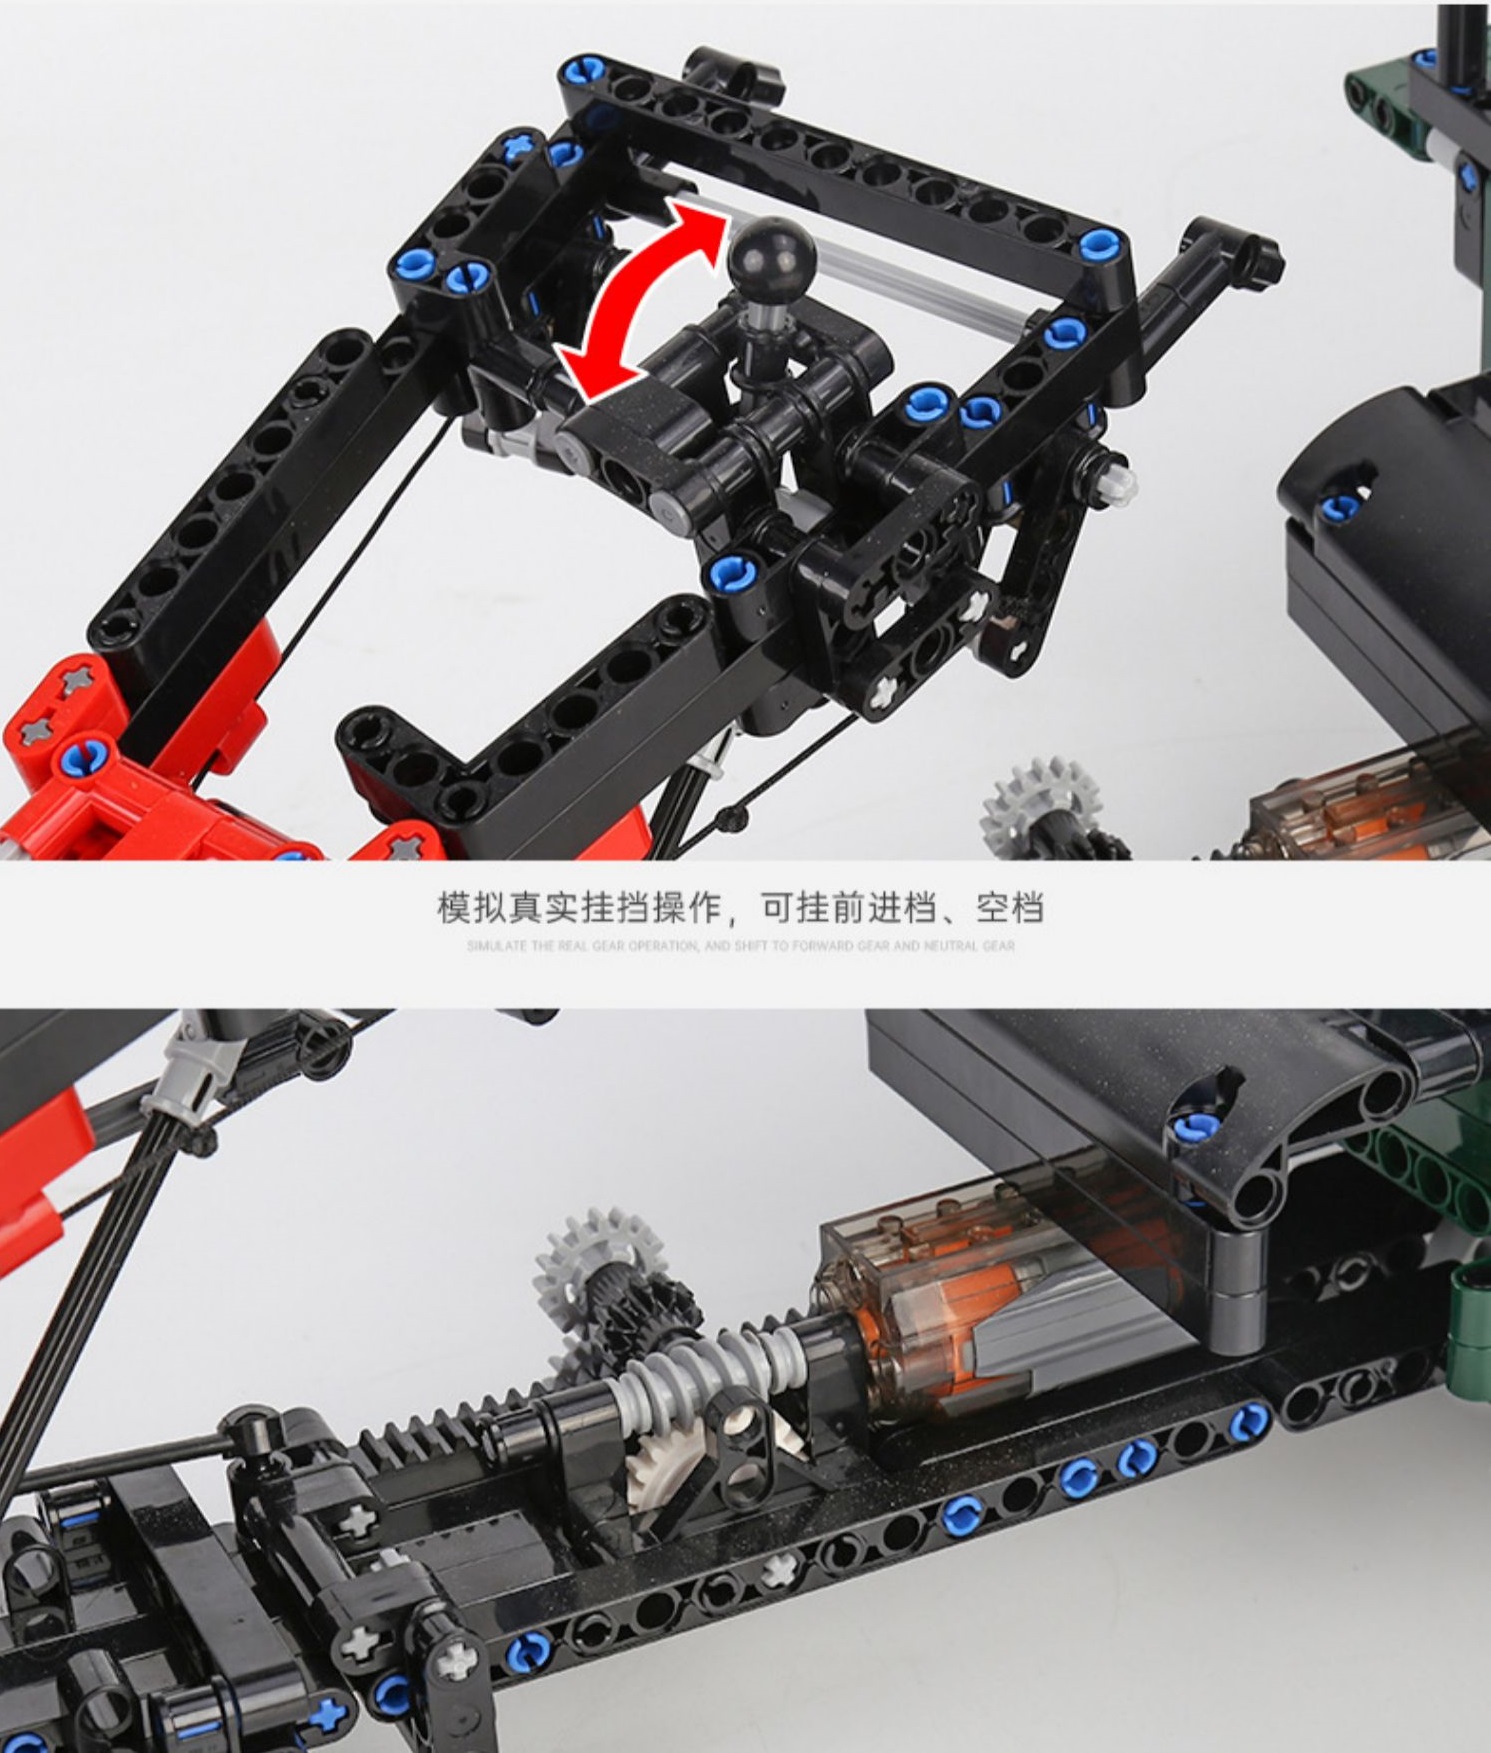 Walk-Behind Tractor Building Toy, Walking Tractor Building Block, Two-Wheel Tractor Mechanical Principle, How does Hand Tractor work